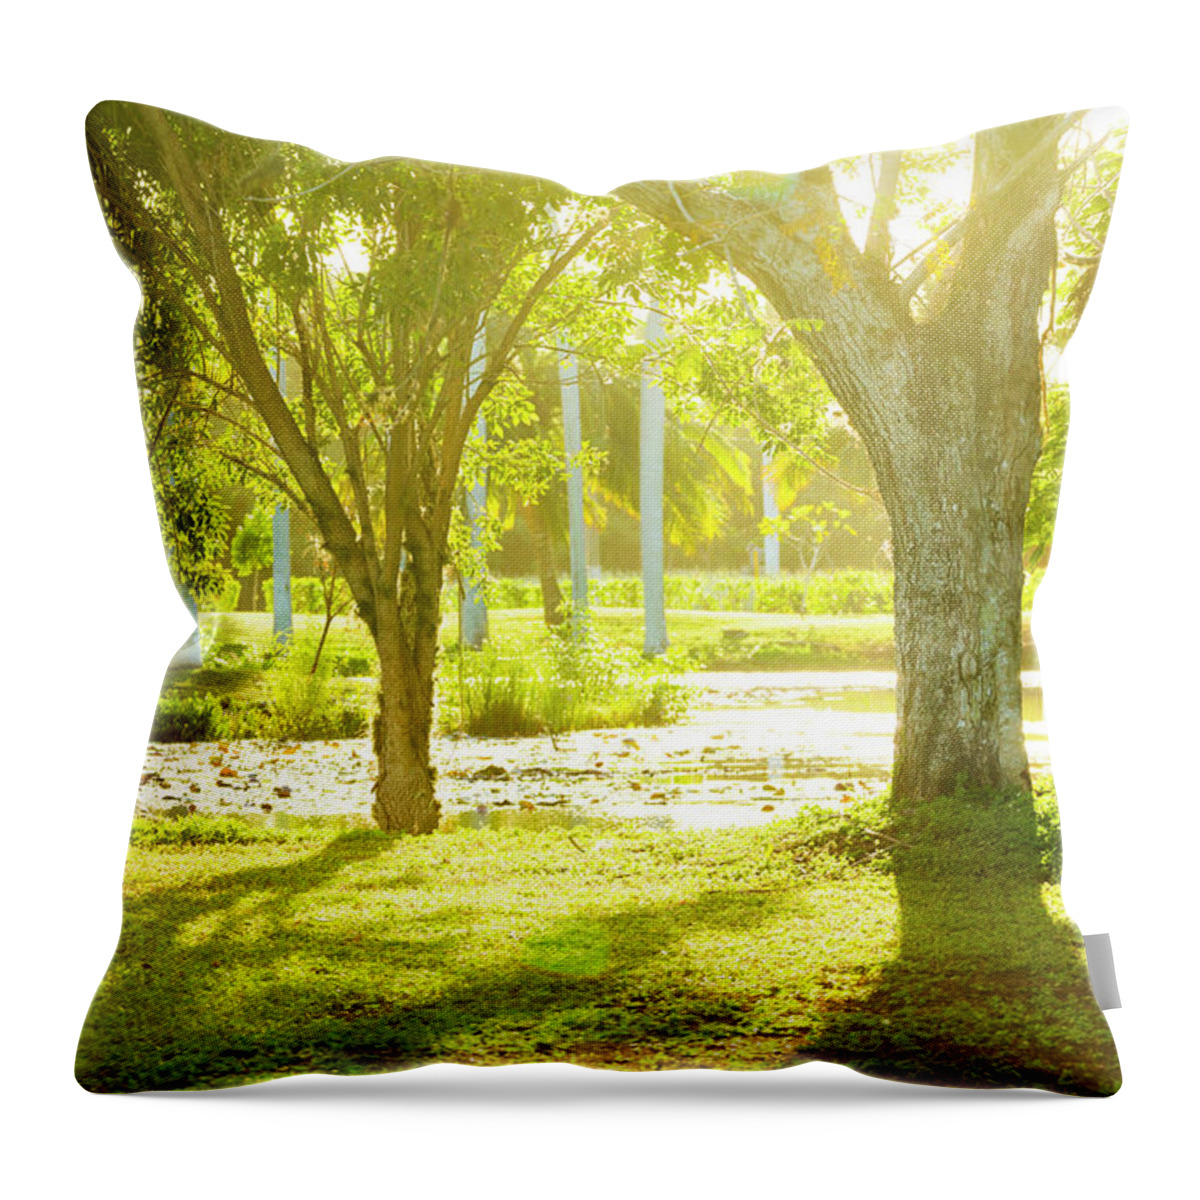 Tropical Rainforest Throw Pillow featuring the photograph Tropical Park In Cuba by Spooh